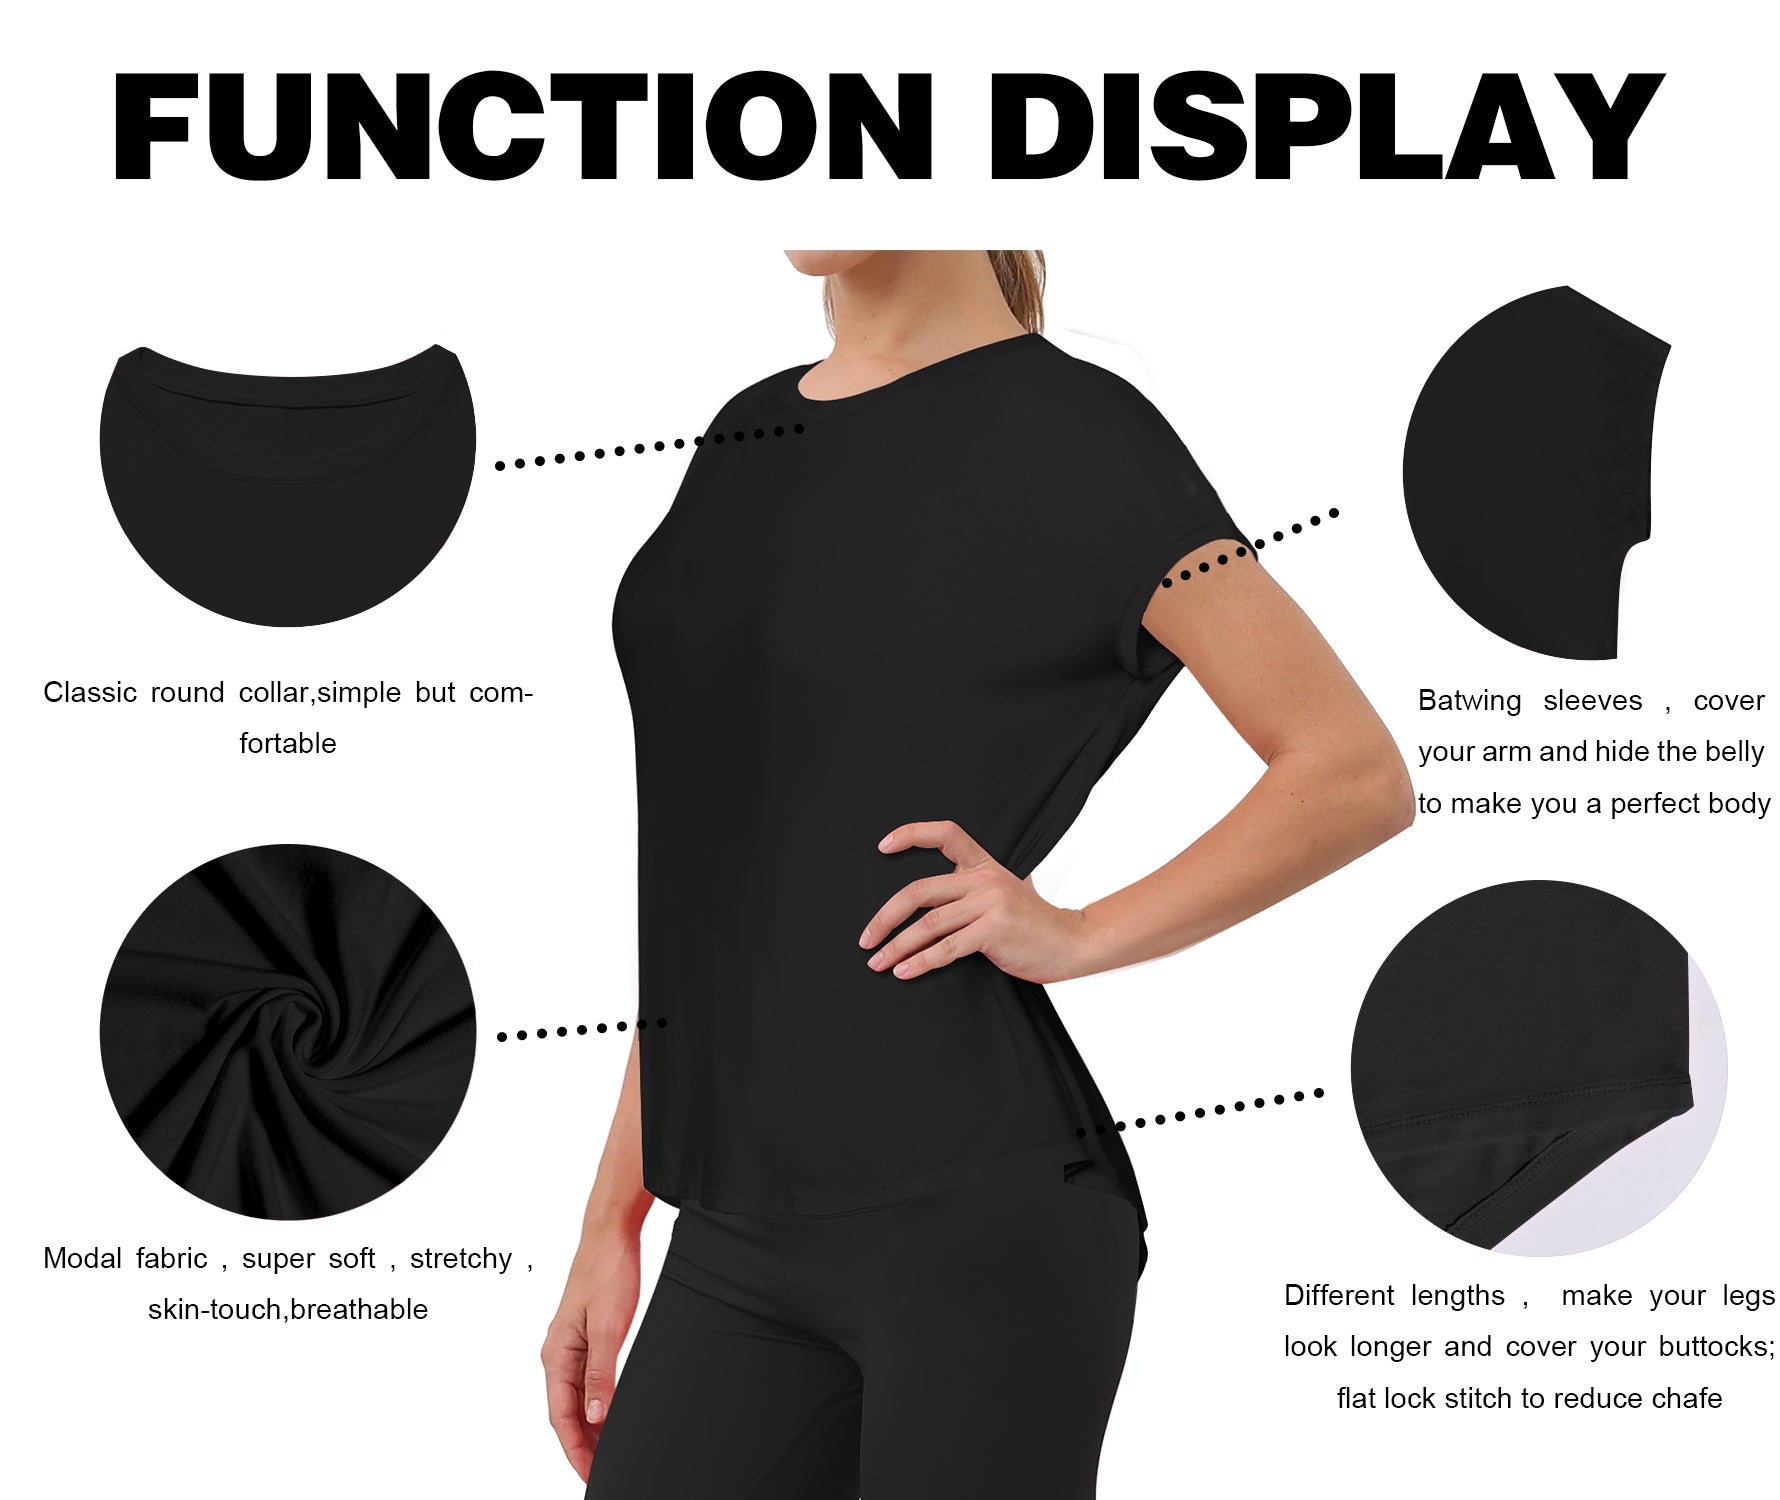 Hip Length Short Sleeve Shirt black 93%Modal/7%Spandex Designed for Running Classic Fit, Hip Length An easy fit that floats away from your body Sits below the waistband for moderate, everyday coverage Lightweight, elastic, strong fabric for moisture absorption and perspiration, sports and fitness clothing.